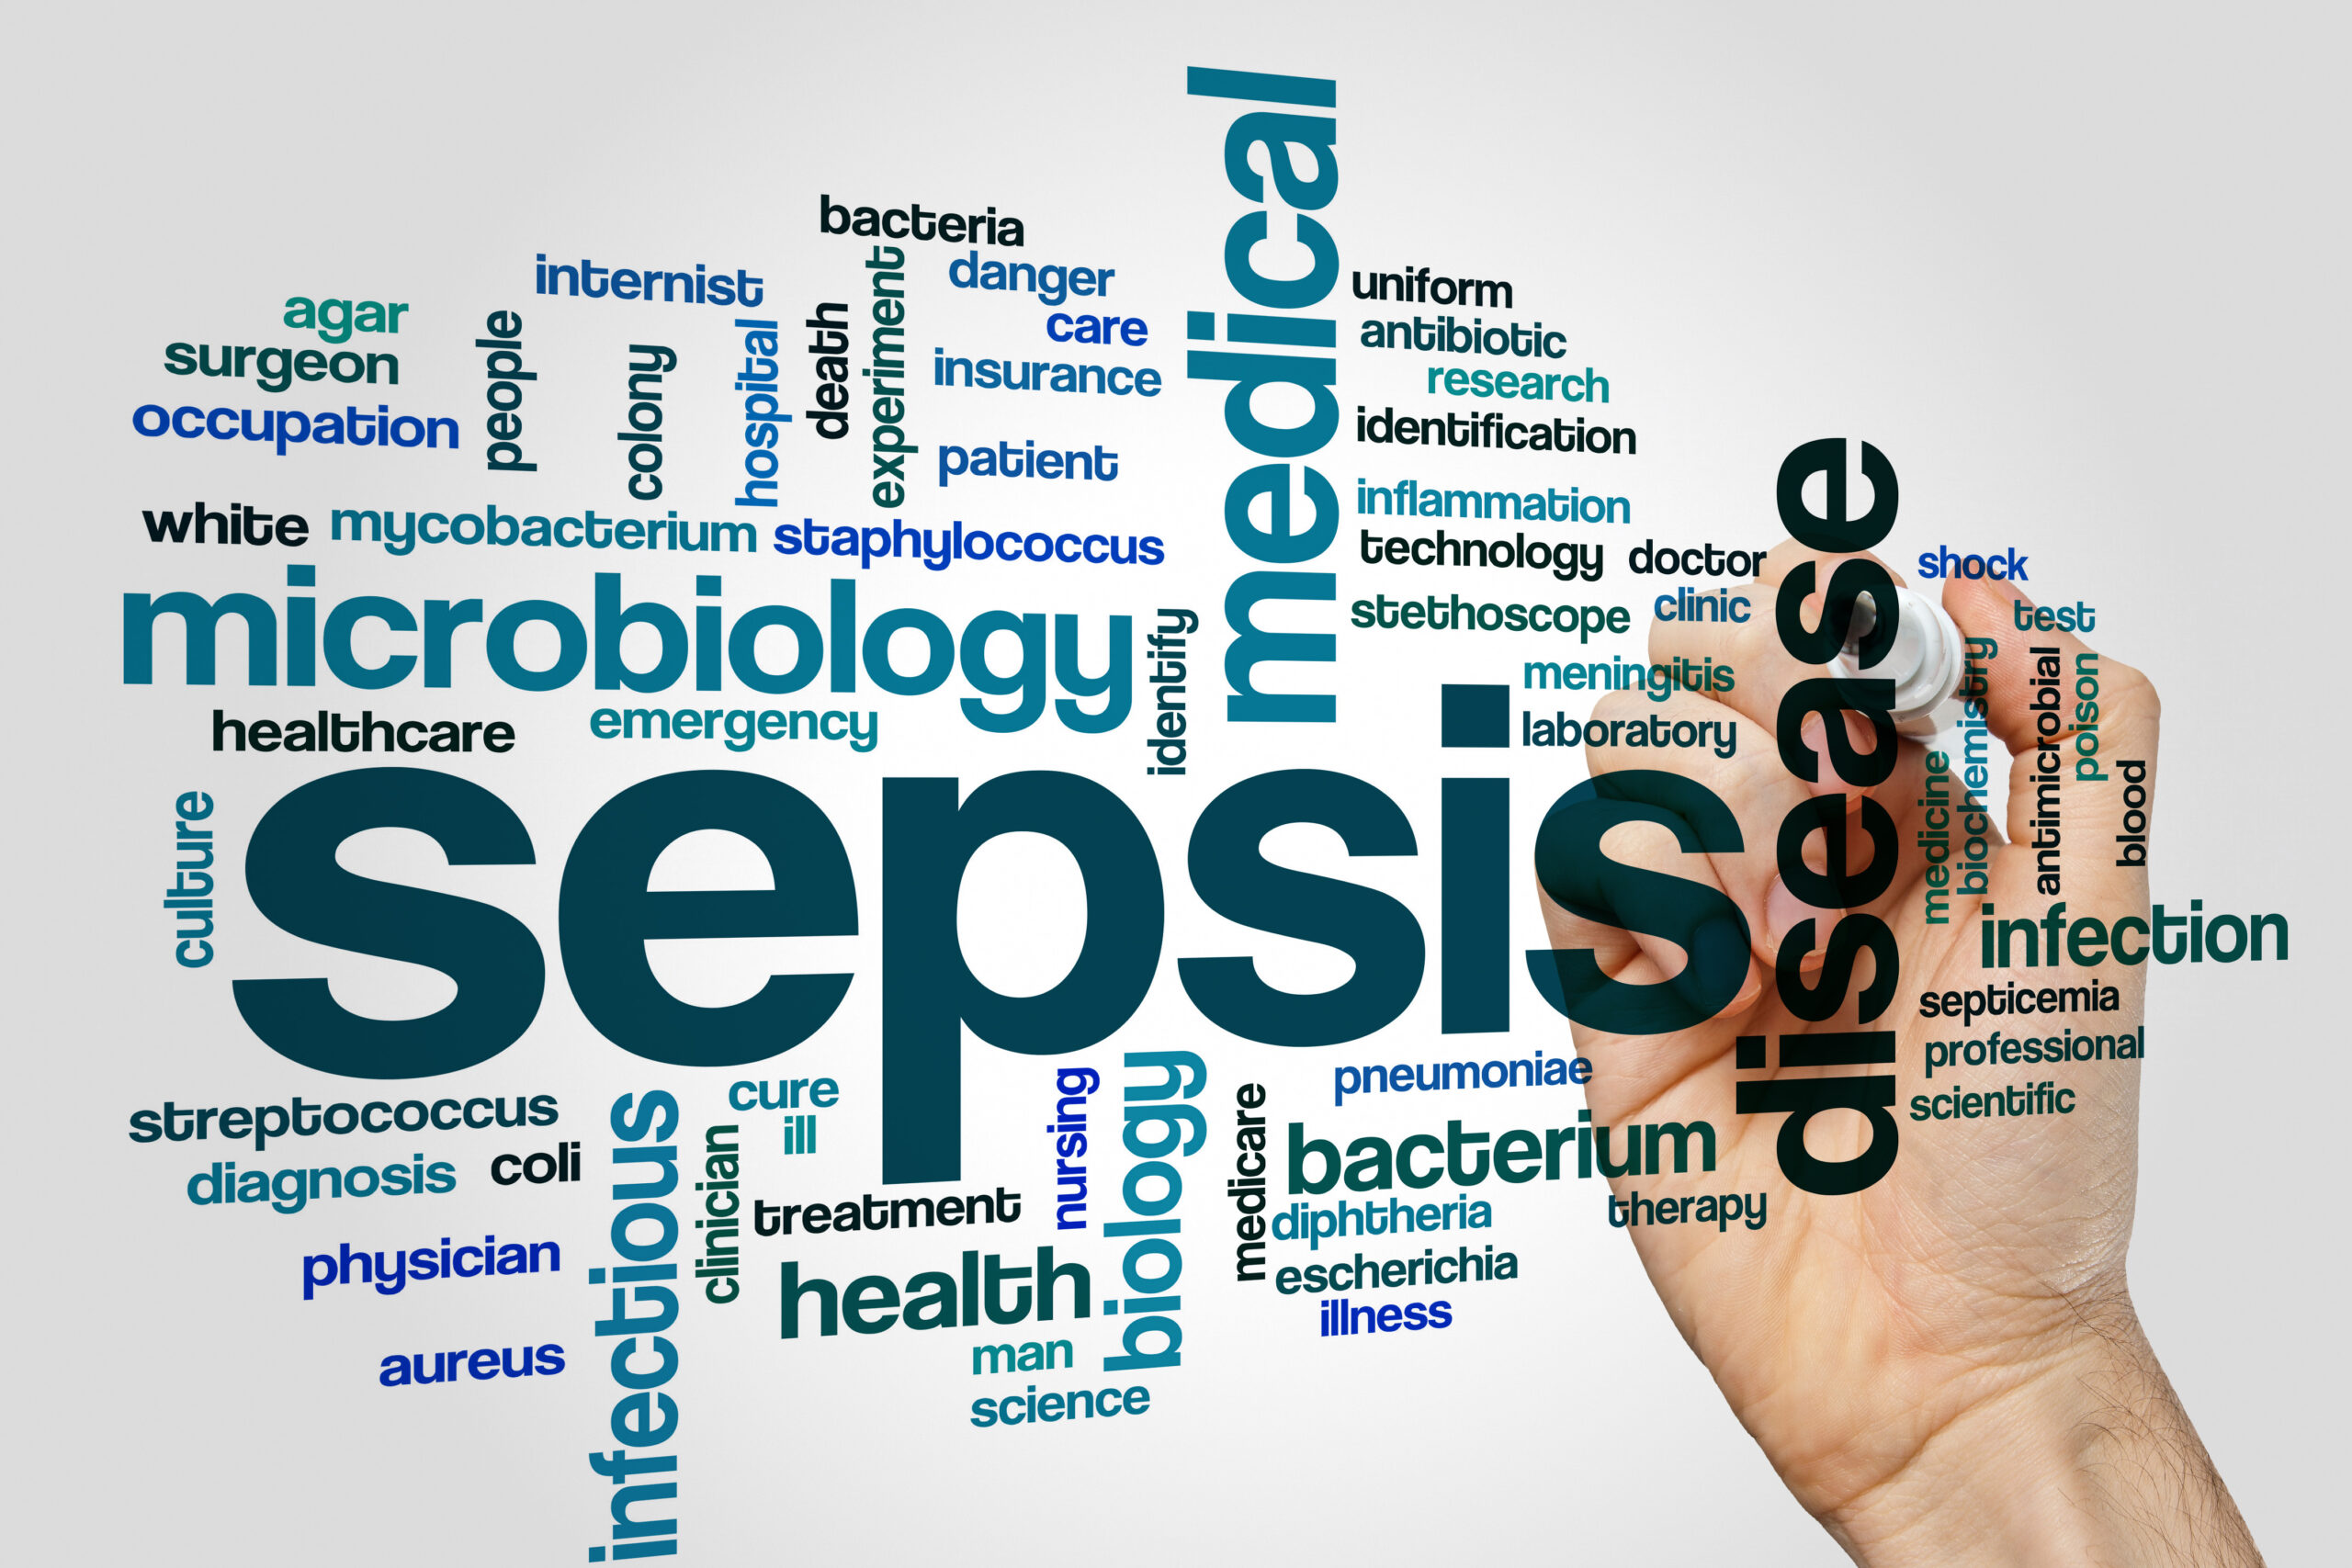 image of hand holding a marker writing words in a word cloud diagram; text reads - sepsis, disease, agar, surgeon, occupation, people, internist, bacteria, danger, care, insurance, patient, death, experiment, hospital, colony, white, mycobacterium, staphylococcus, identify, microbiology, healthcare, emergency, culture, streptococcus, diagnosis, coli, physician, aureus, infectious, clinician, cure, ill, treatment, health, man, nursing, science, biology, Medicare, pneumoniae, bacterium, diphtheria, Escherichia, illness, therapy, uniform, medical, antibiotic, research, identification, inflammation, technology, doctor, clinic, stethoscope, meningitis, laboratory, shock medicine, biochemistry, antimicrobial, poison, blood, infection, septicemia, professional, scientific